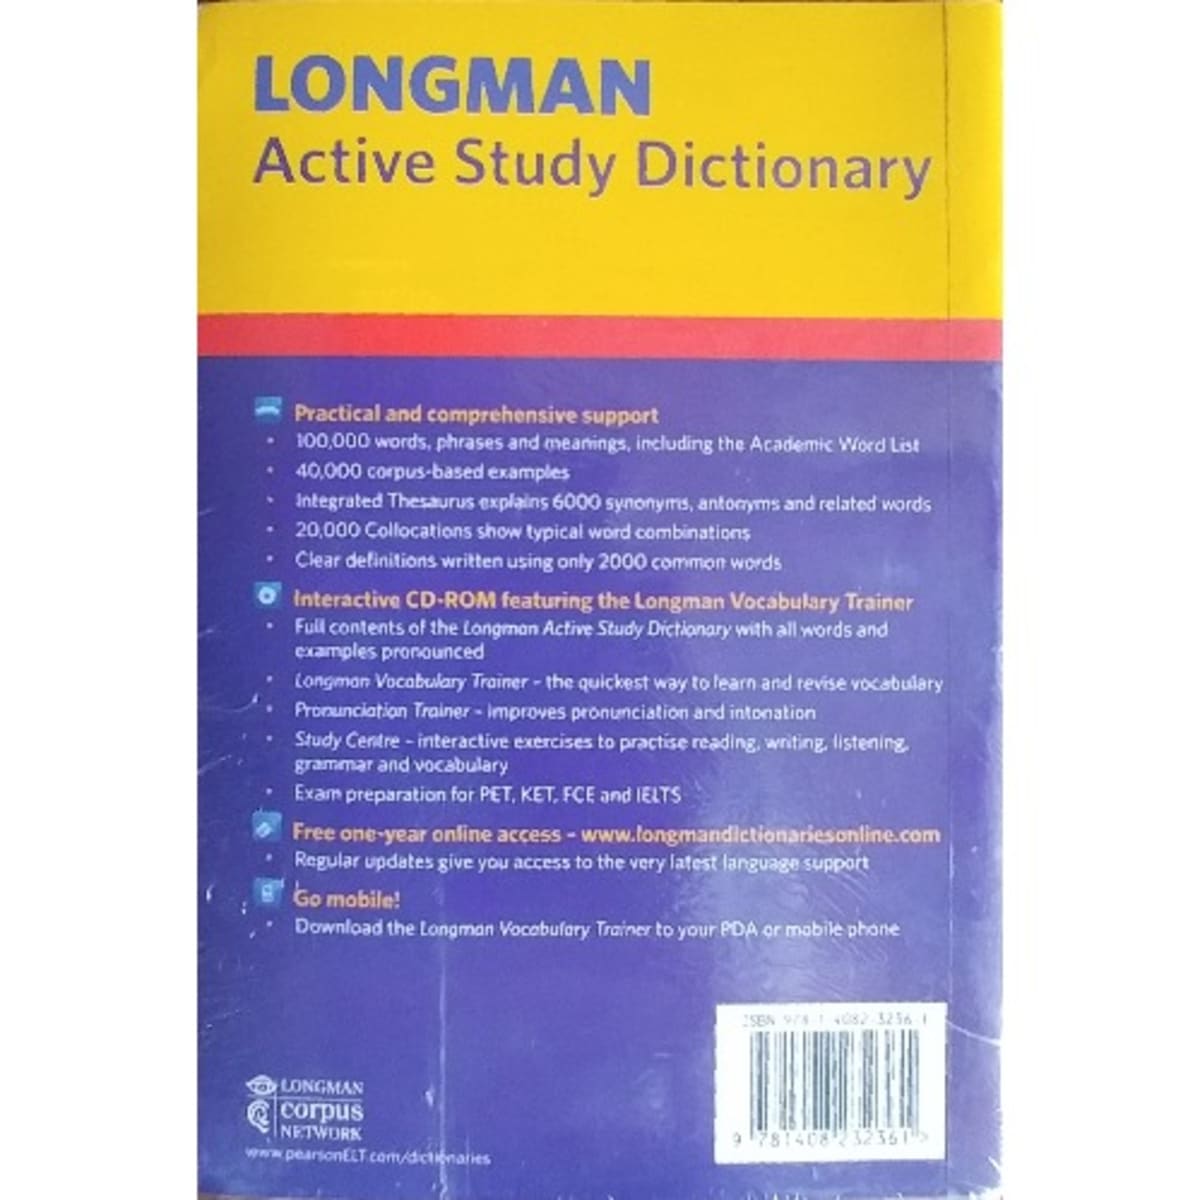 Upper-intermediate　For　Intermediate　Longman　5th　Edition　Konga　Online　Active　Study　Learners　Dictionary　Shopping